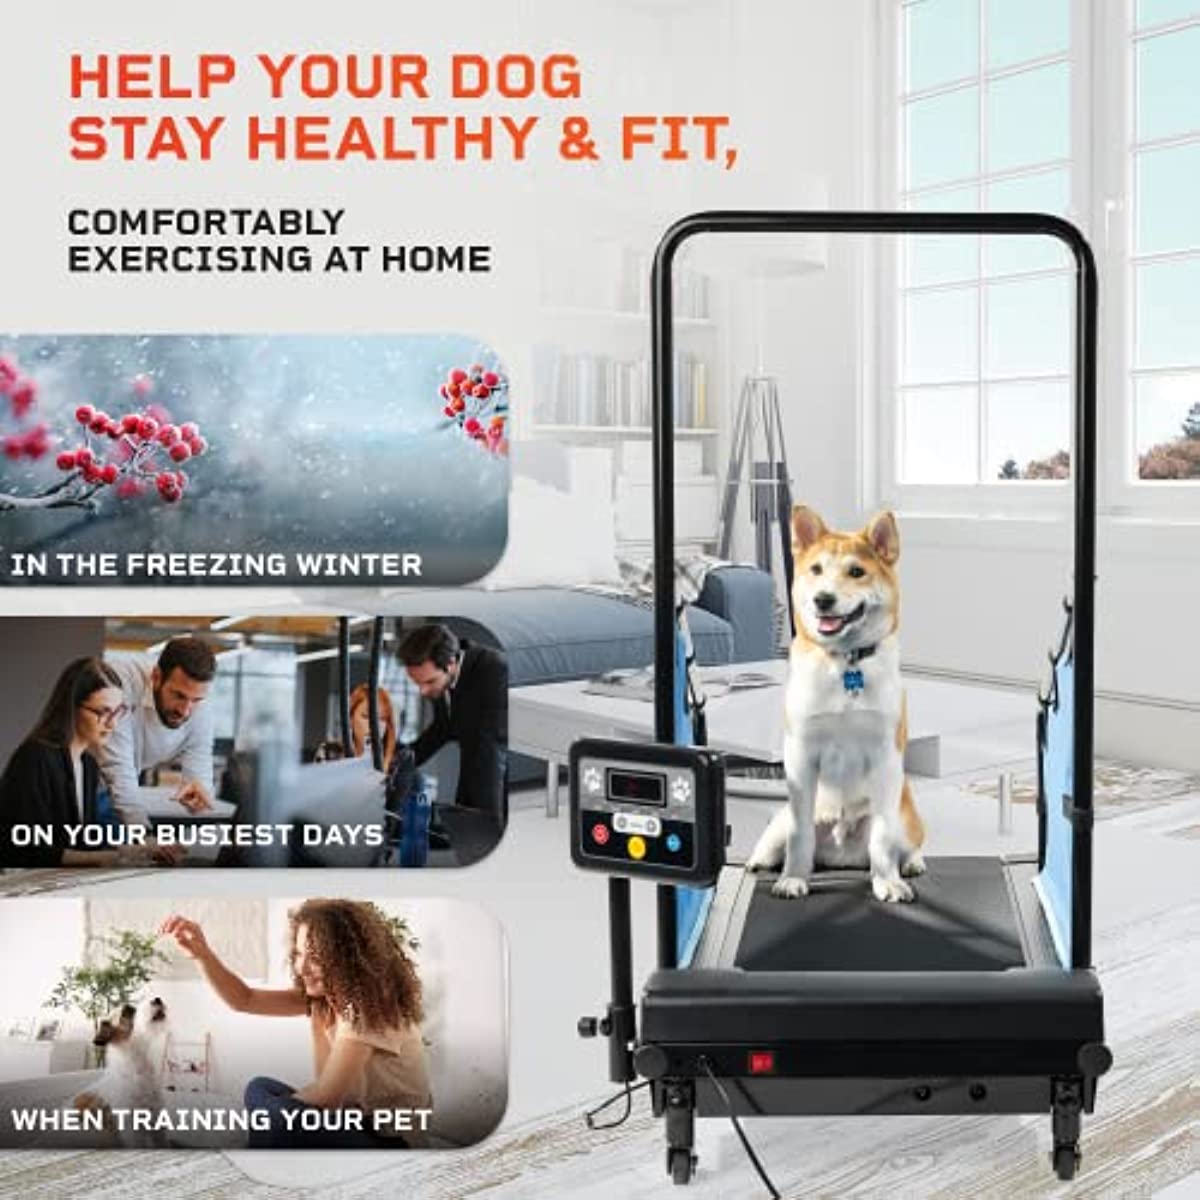 Dog Pacer Treadmill for Healthy & Fit Pets - Dog Treadmill Run Walk for Indoor Training for Dogs up to 130 lbs